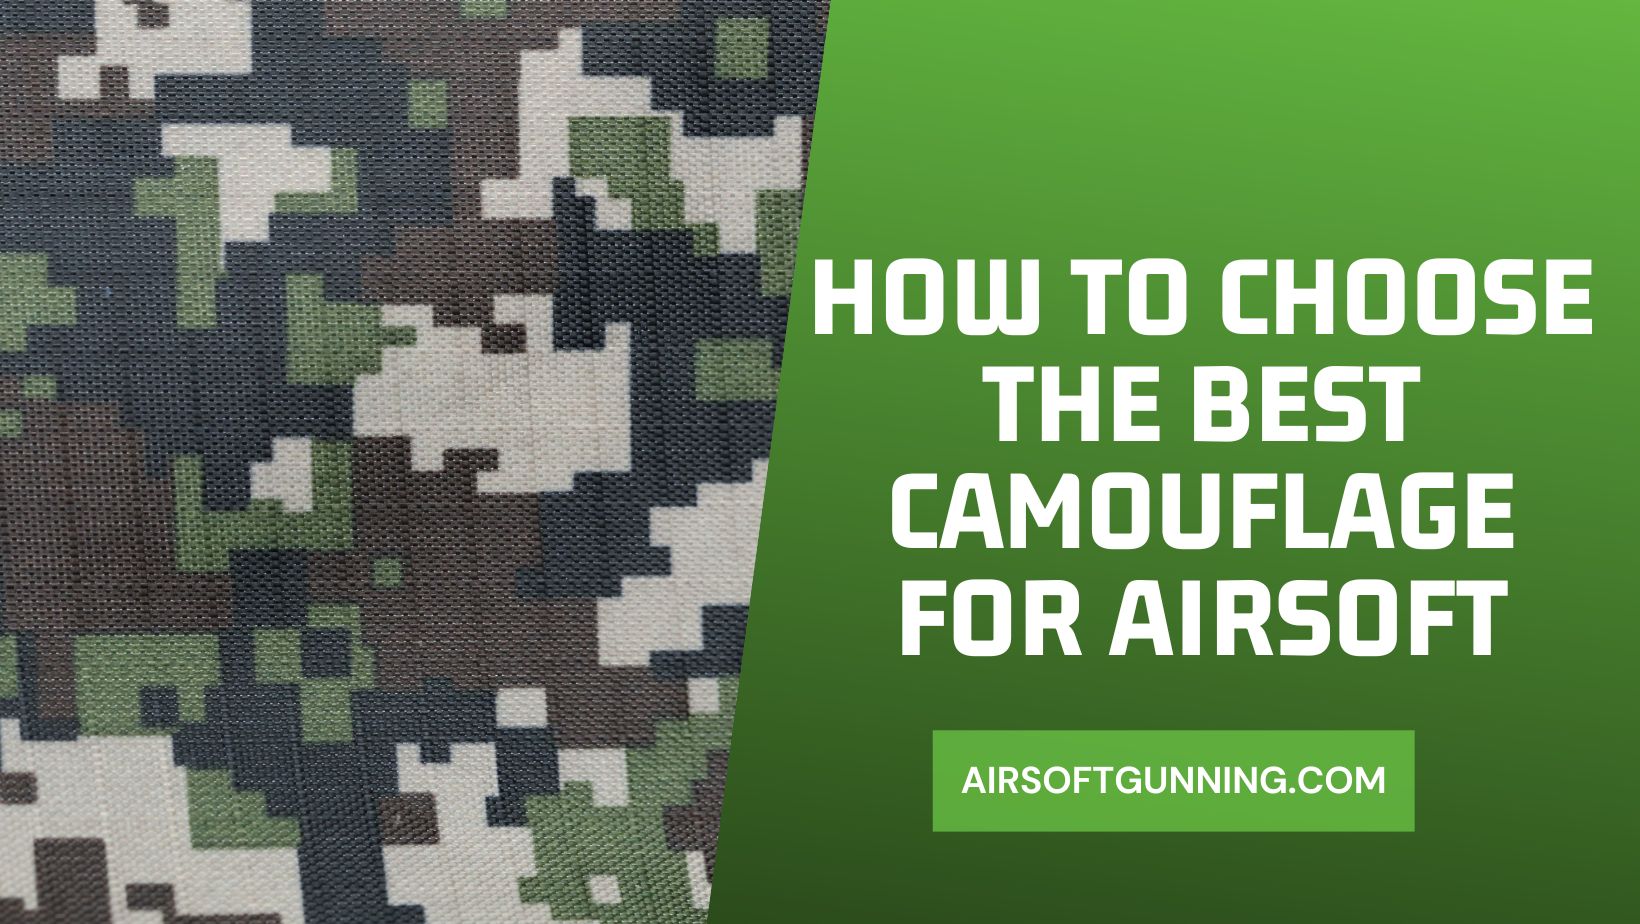 How to Choose the Best Camouflage for Airsoft